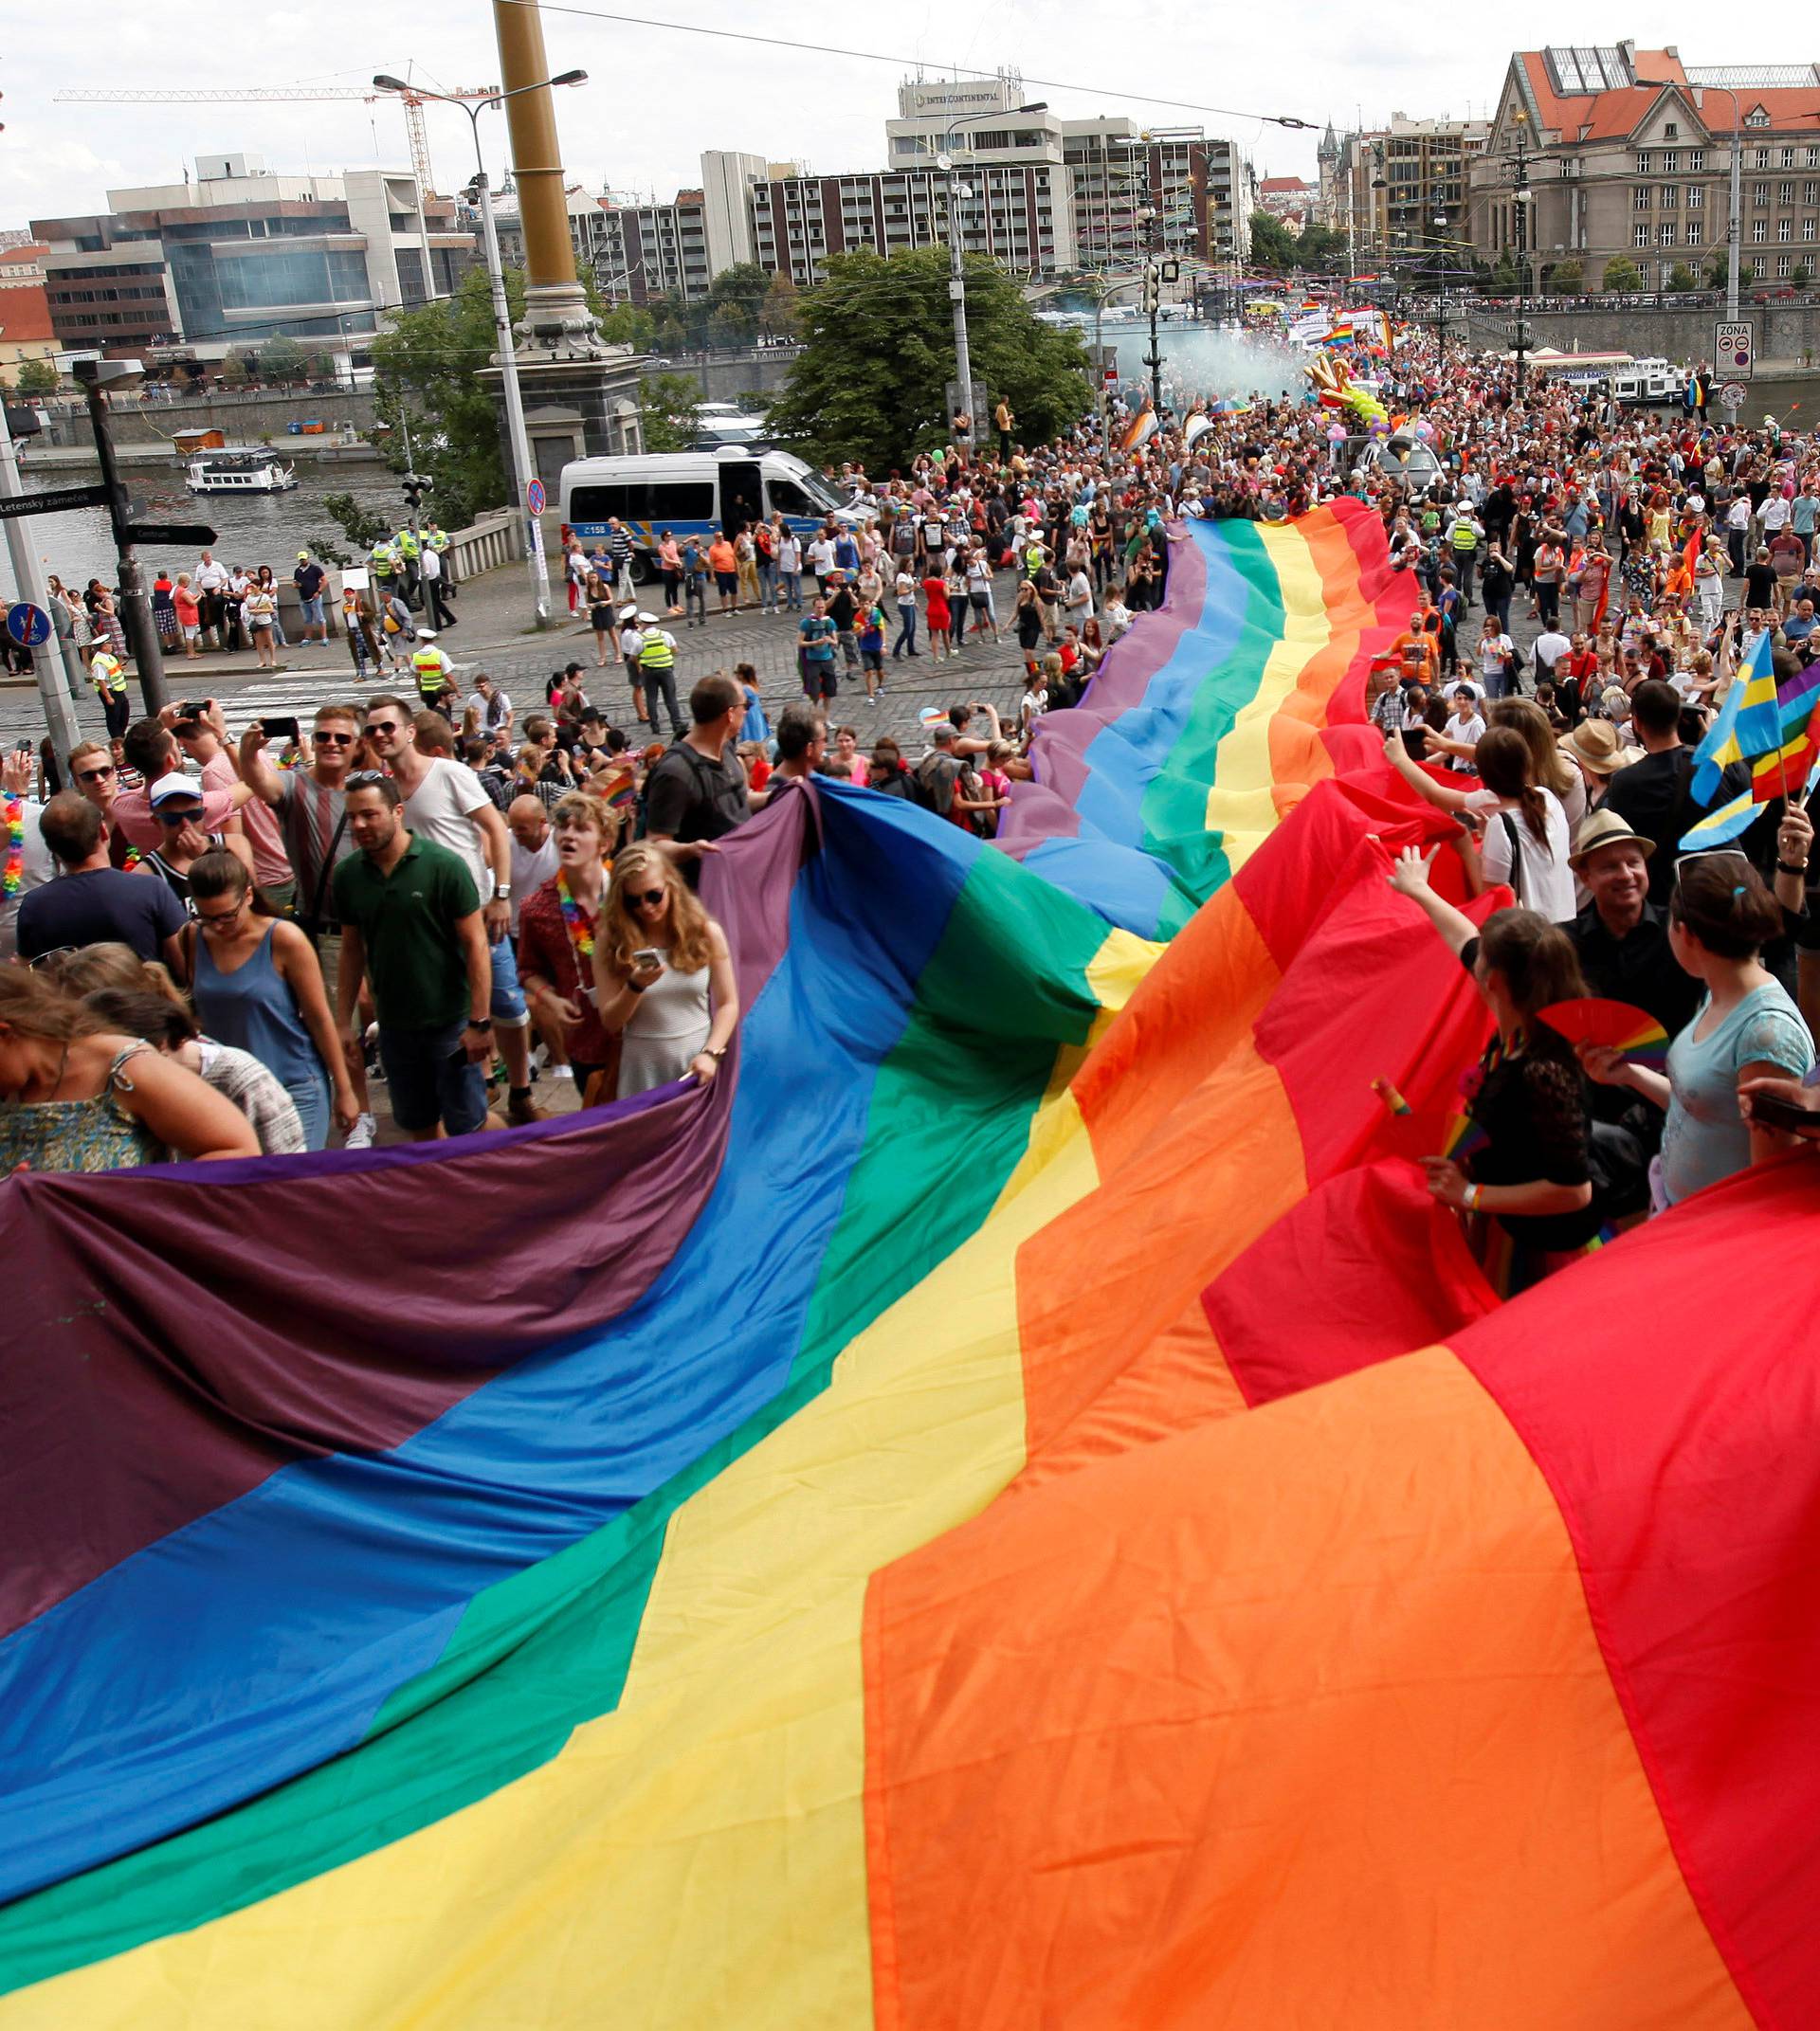 Participants hold a giant rainbow flag during the Prague Pride Parade where thousands marched through the city centre in support of gay rights, in Czech Republic